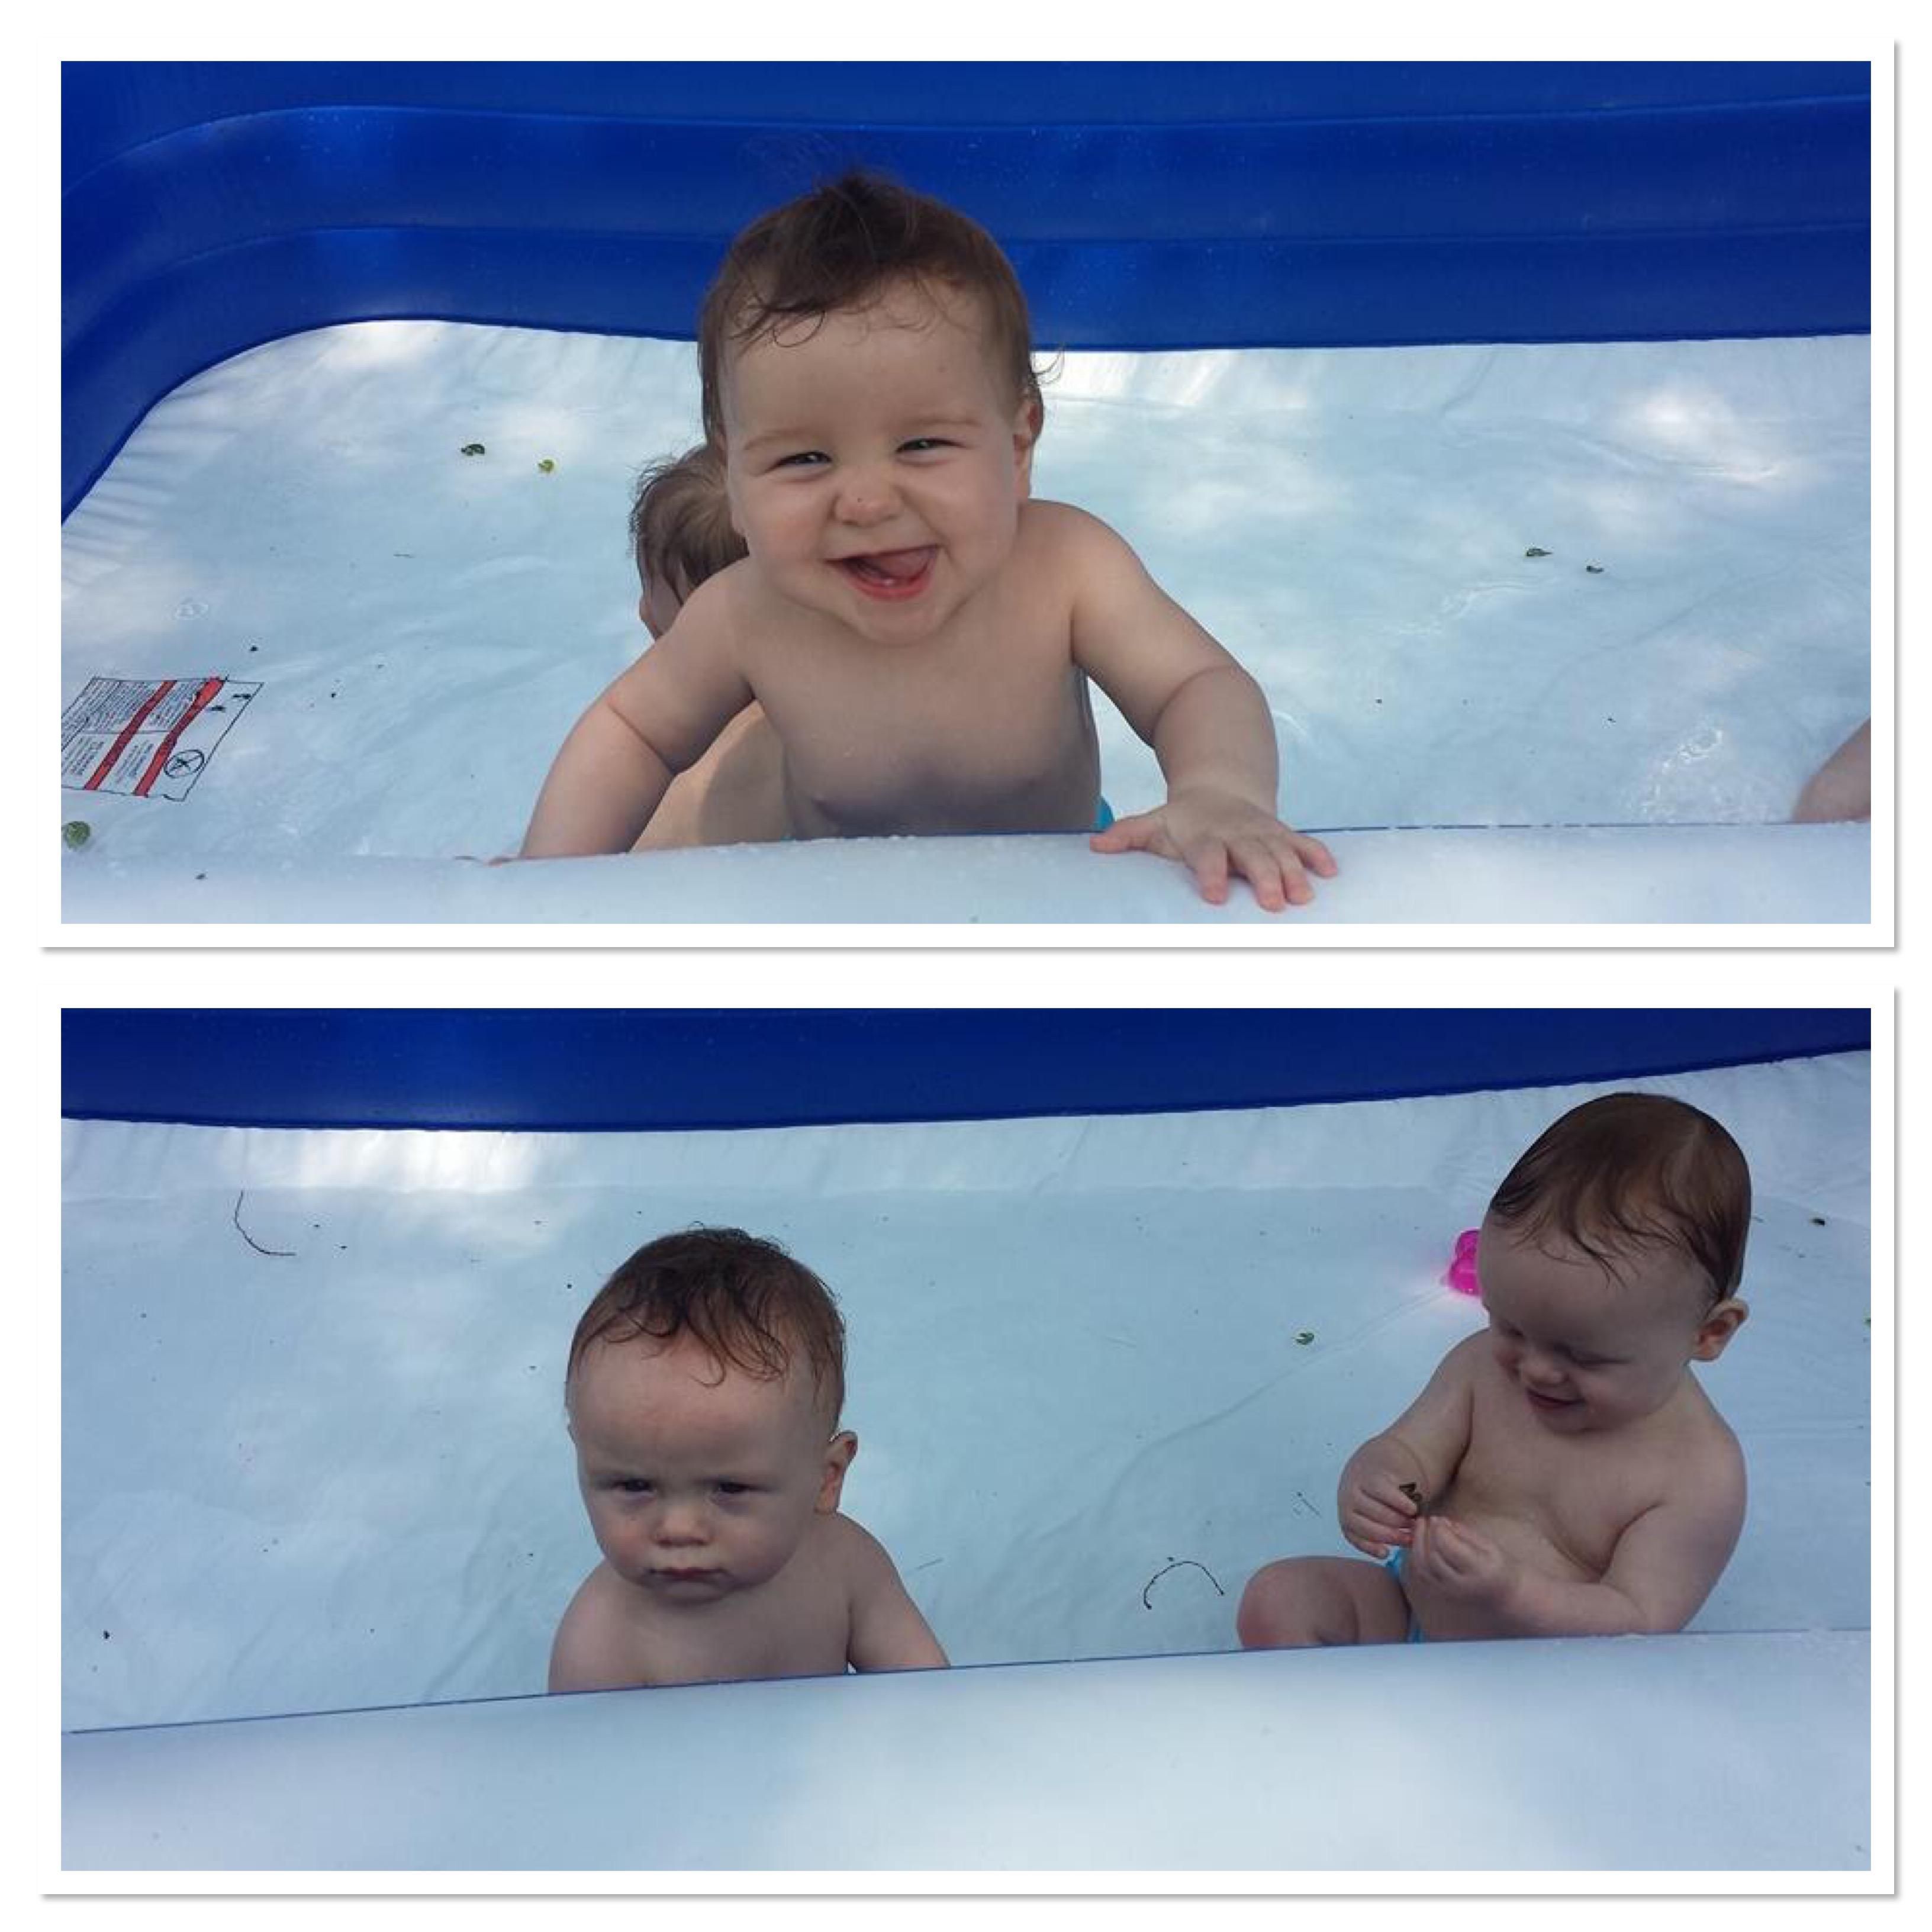 I bought my 1 year triplets a small inflatable pool. It received mixed reviews.